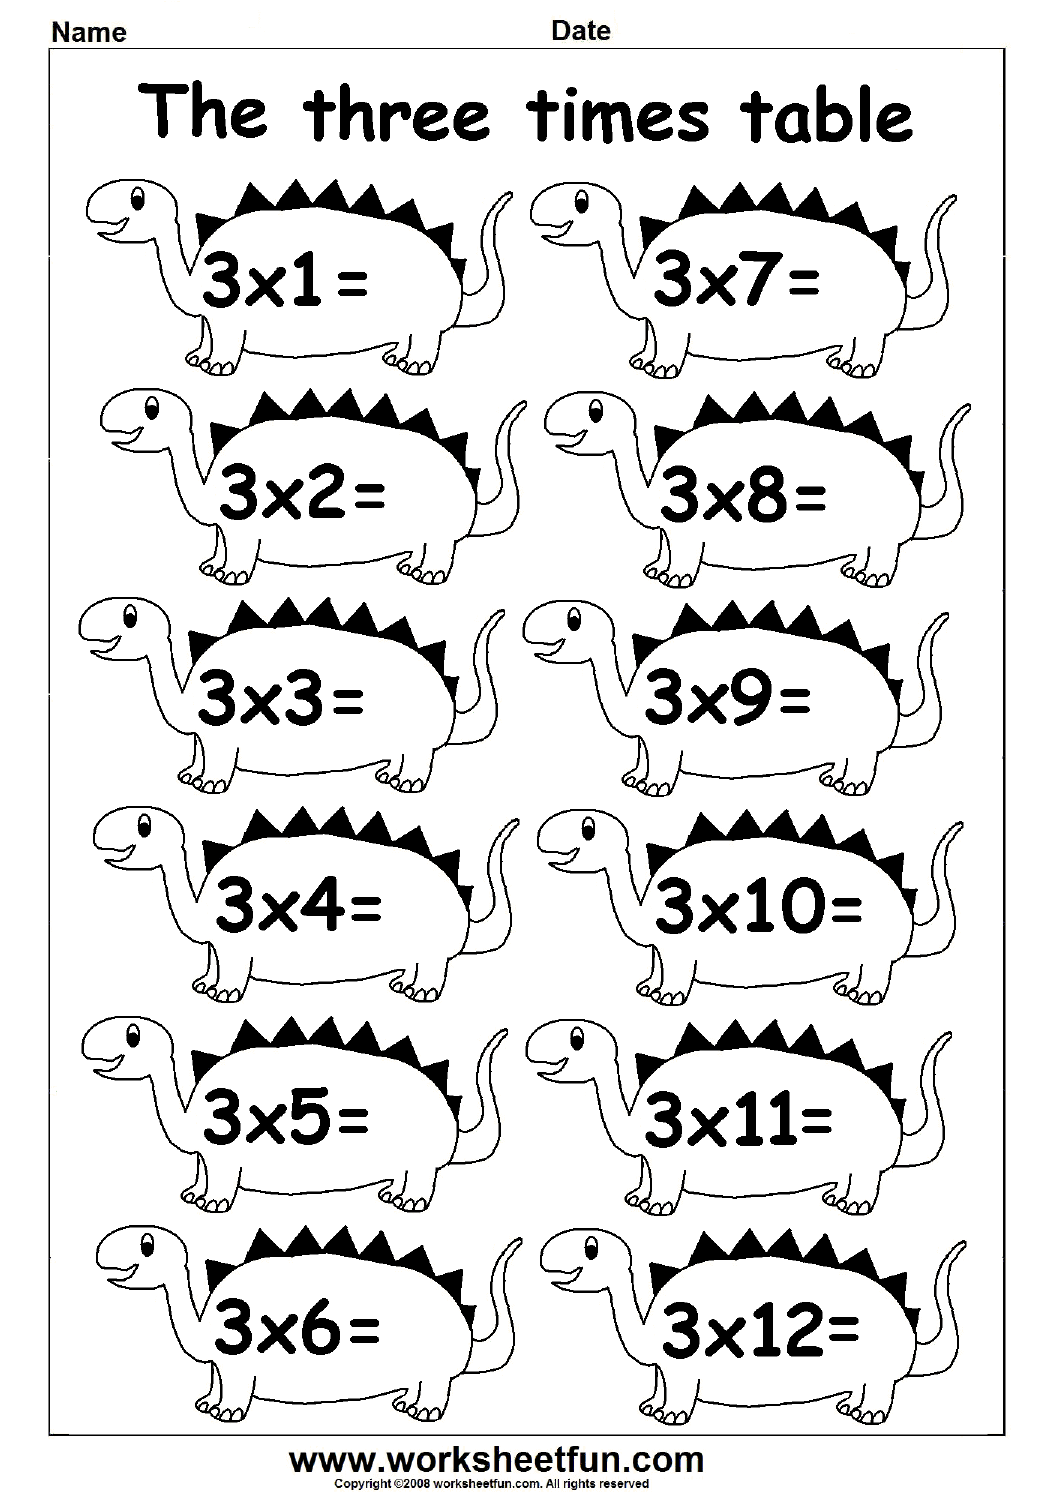 Multiplication Times Tables Worksheets 2 3 4 5 Times Tables Four Worksheets FREE Printable Worksheets Worksheetfun